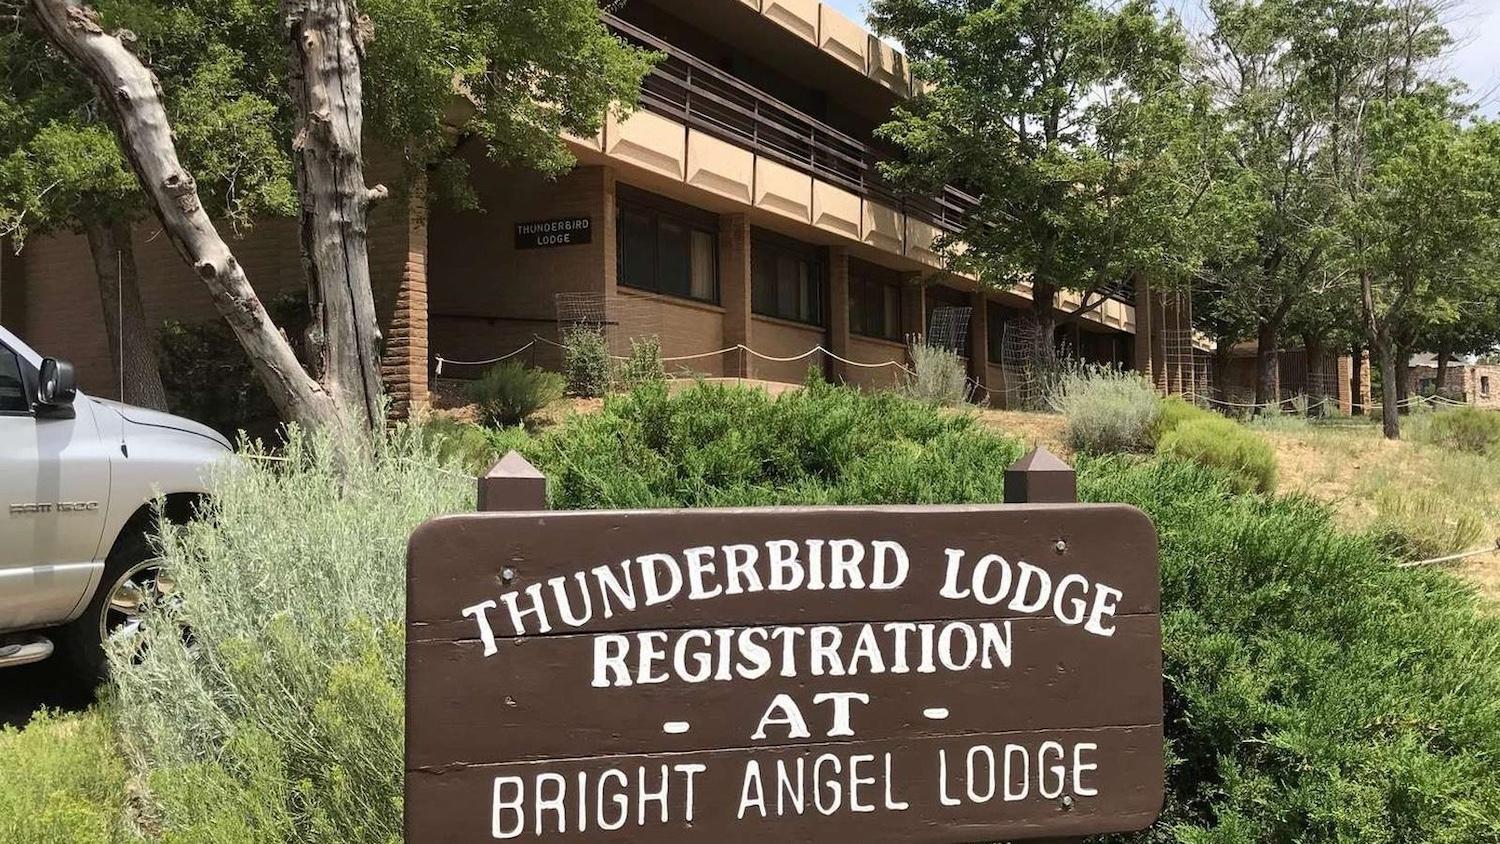 A room at the Thunderbird Lodge on the South Rim of Grand Canyon National Park could cost you $400/night next summer/NPS file